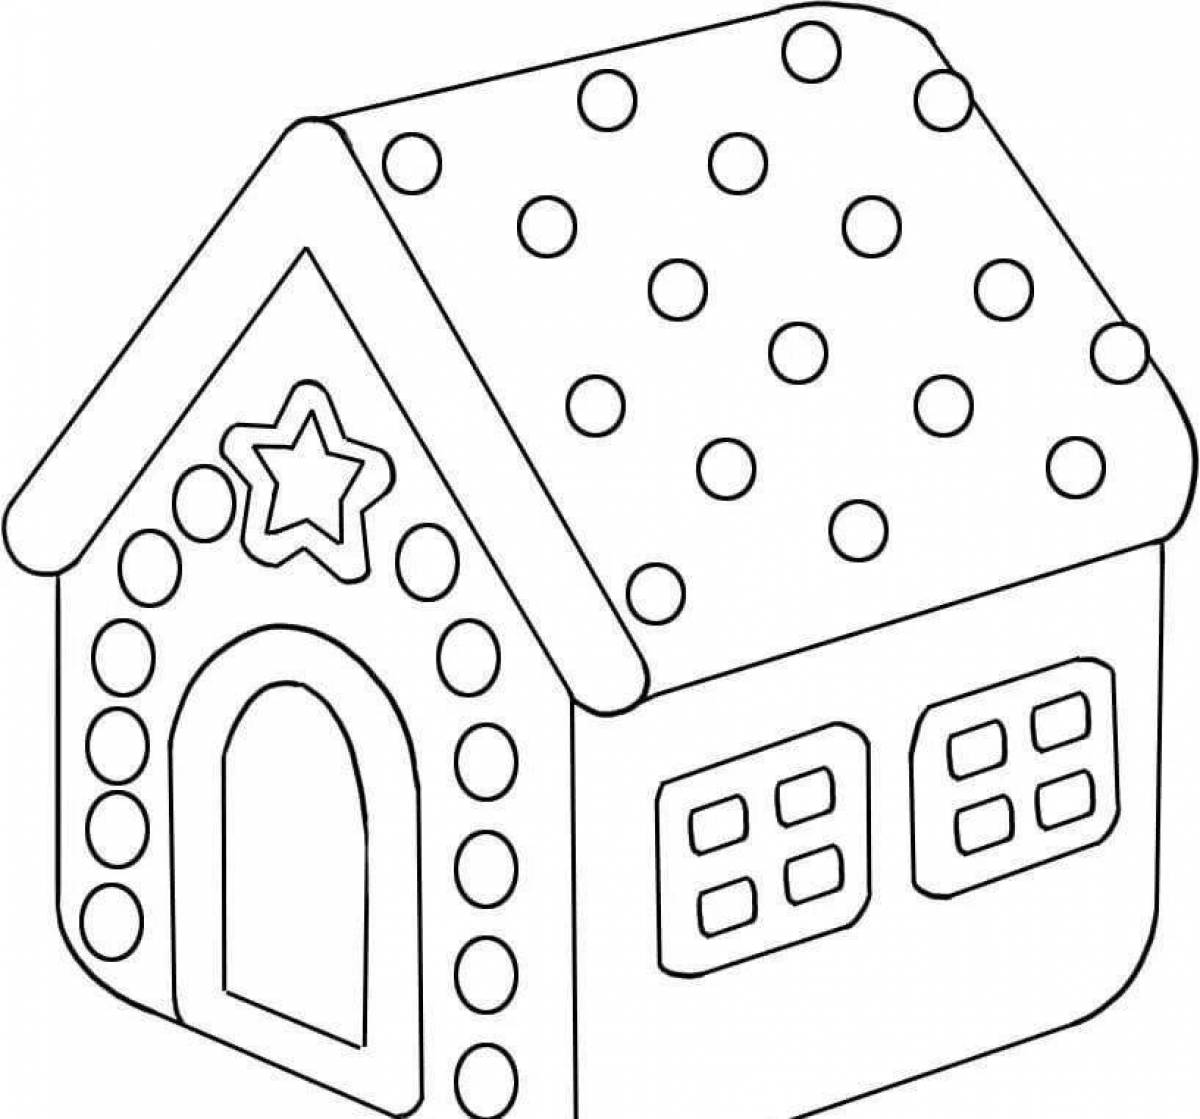 Amazing house coloring book for kids